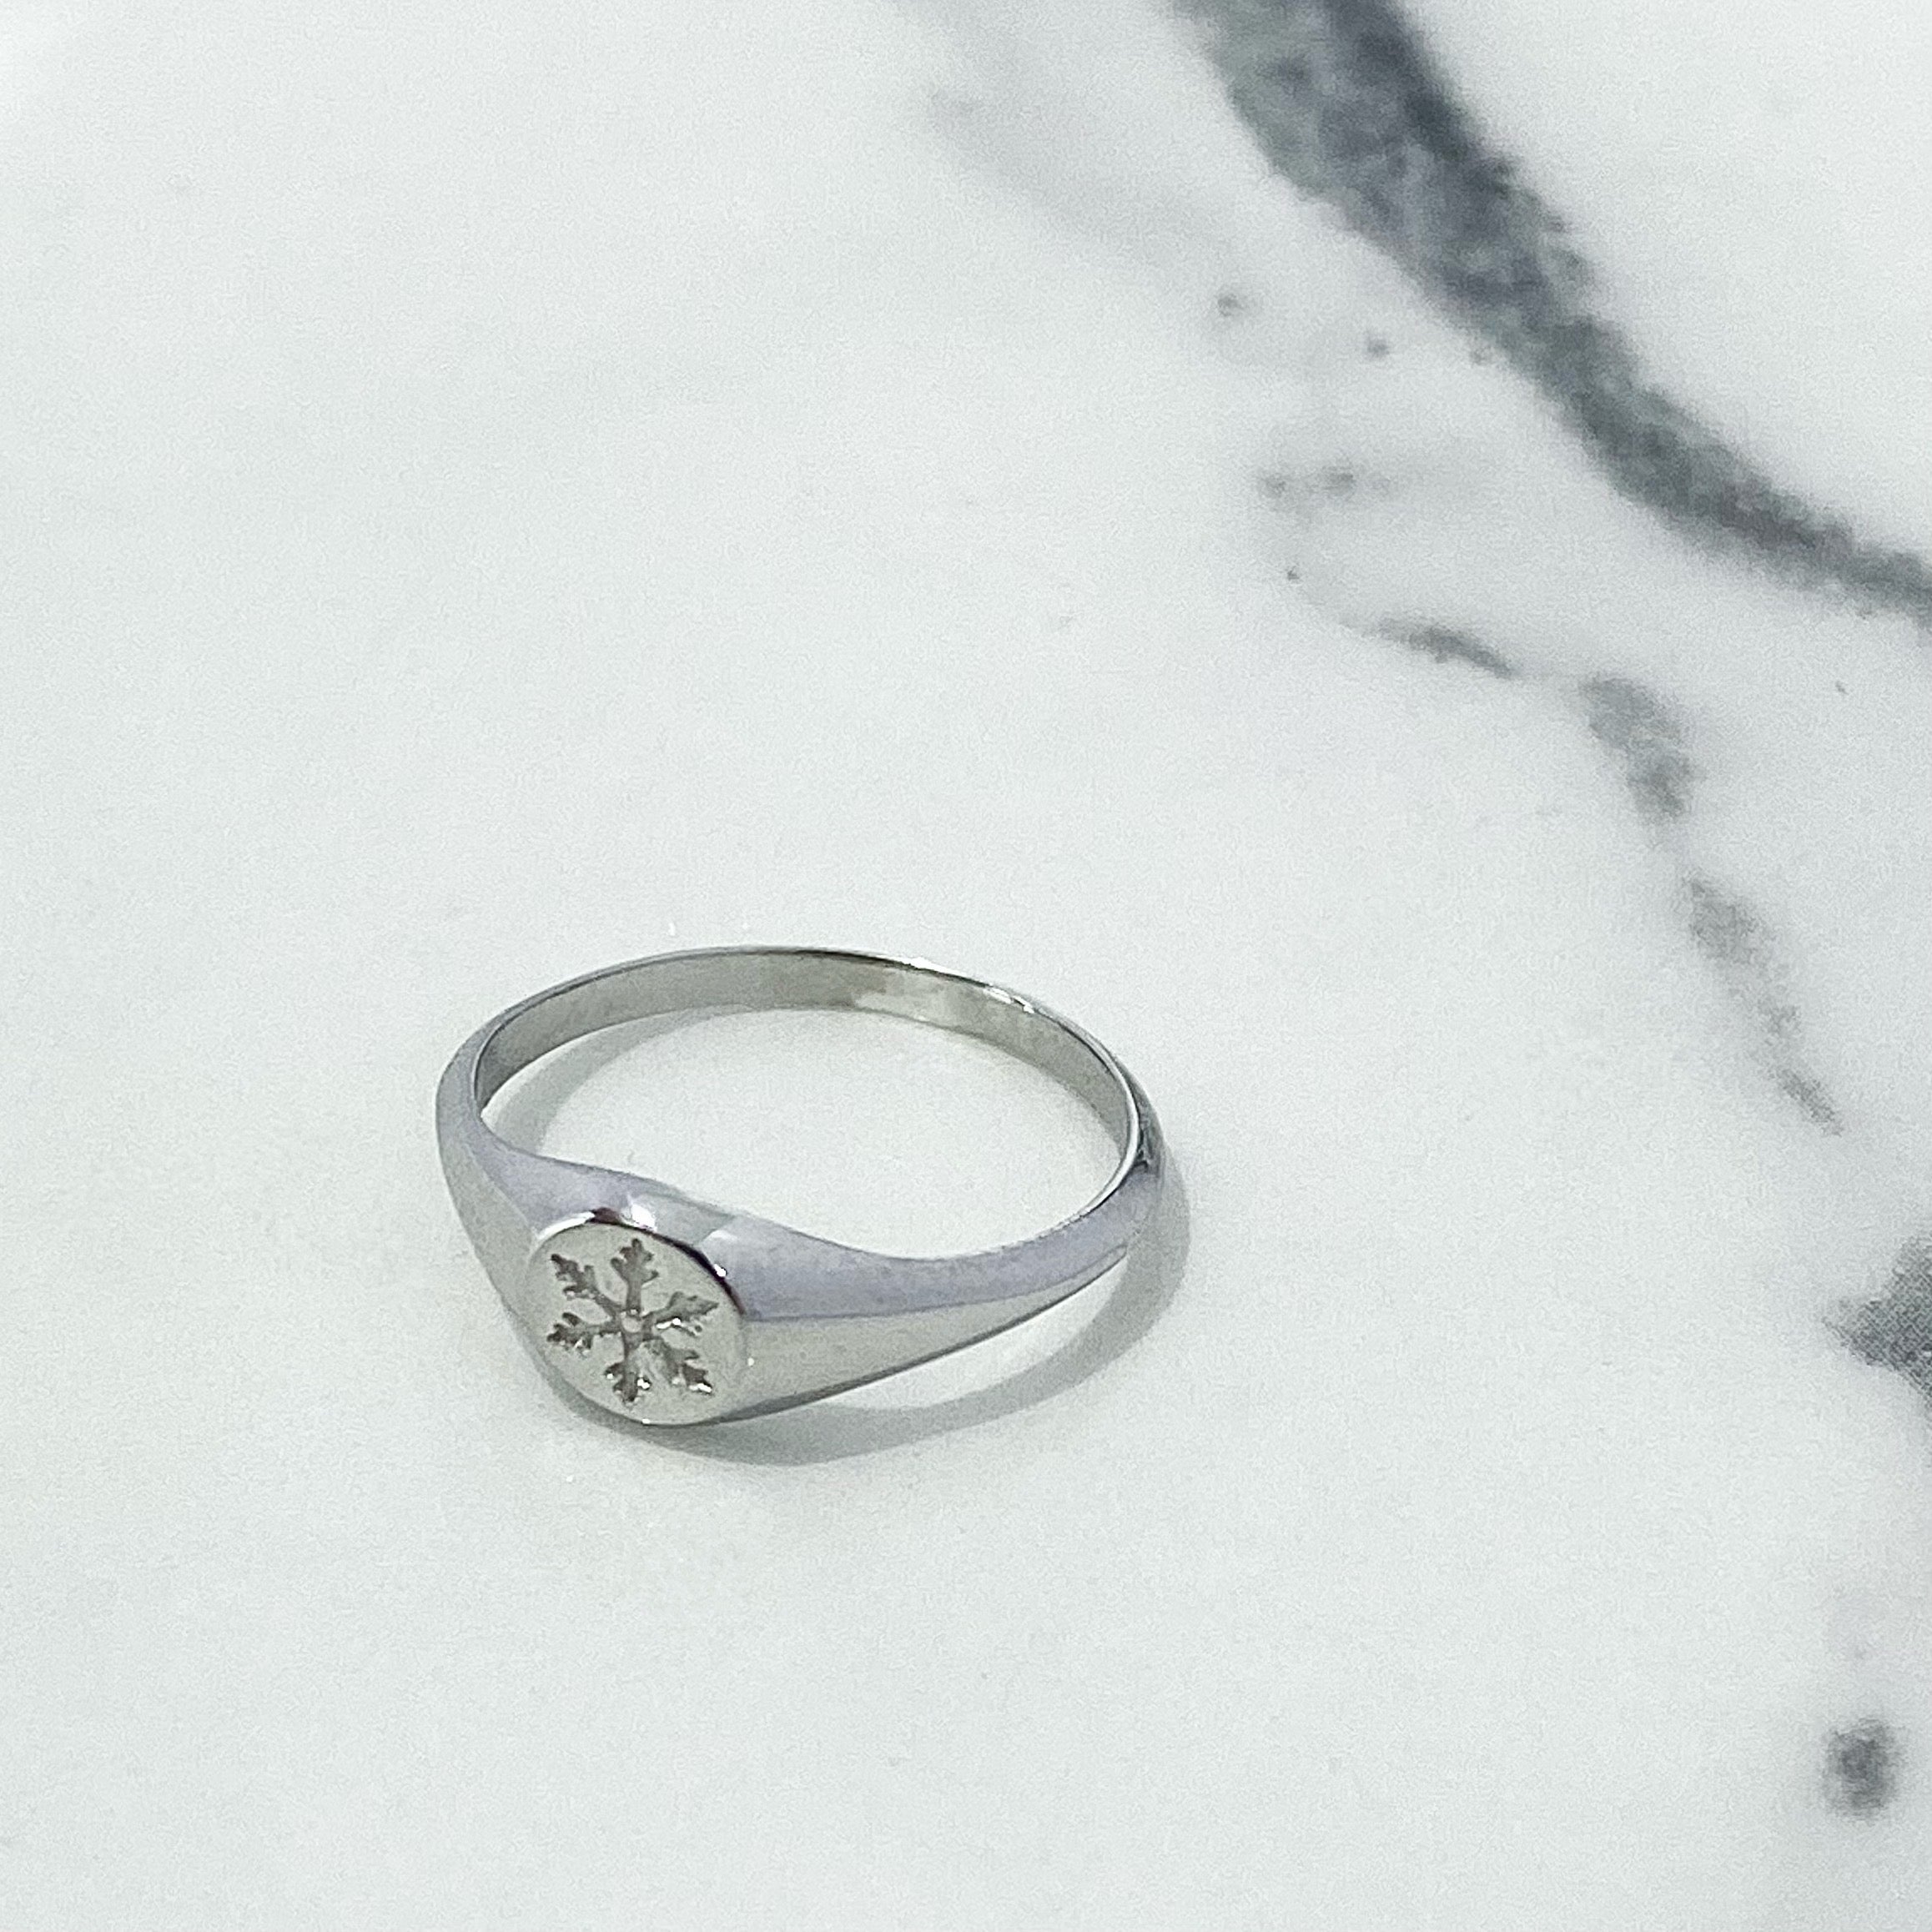 Snowflake Signet Ring in Sterling Silver